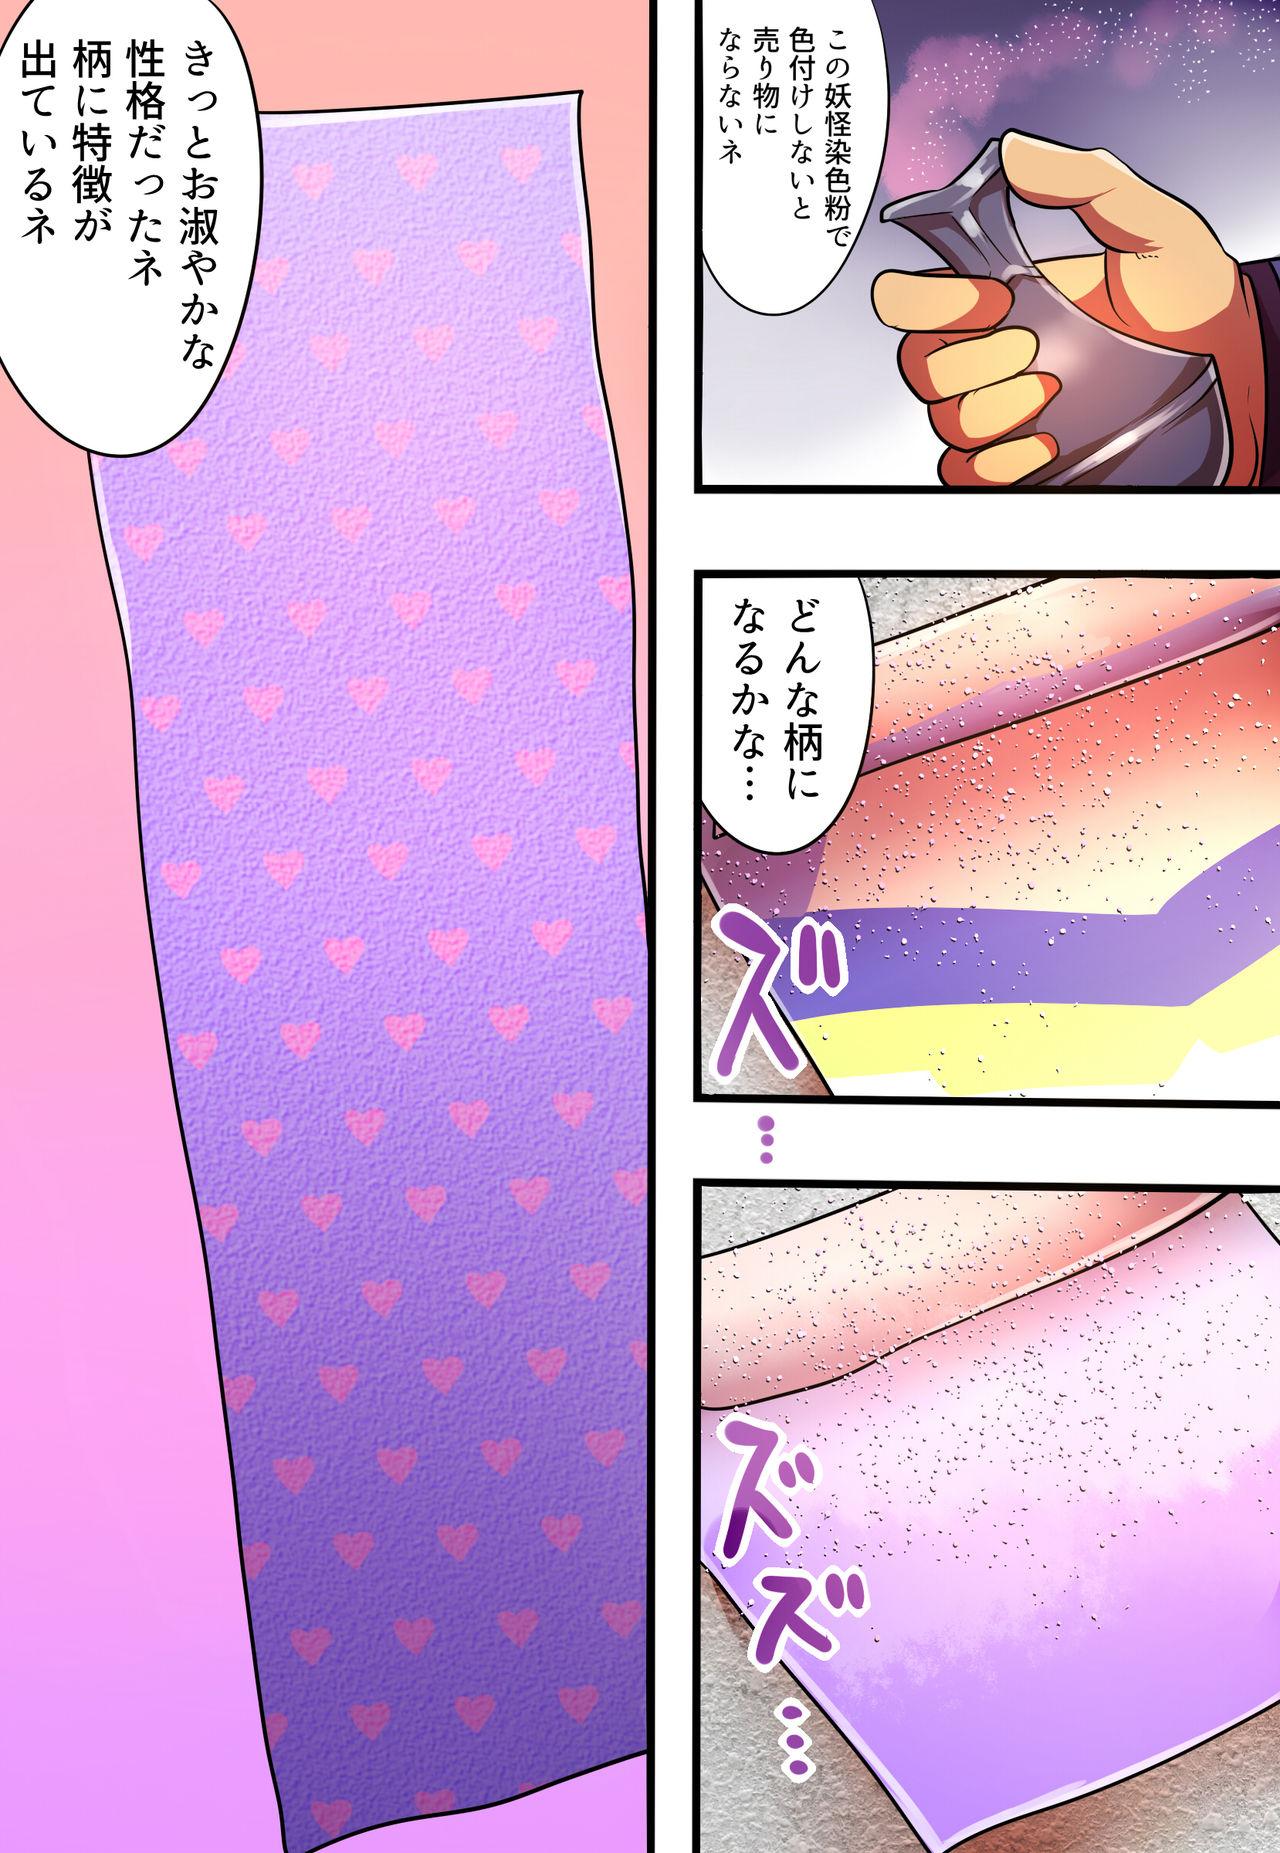 Tittyfuck shinenkan Comic of Textile-ification ghost storys Orgasmus - Page 4